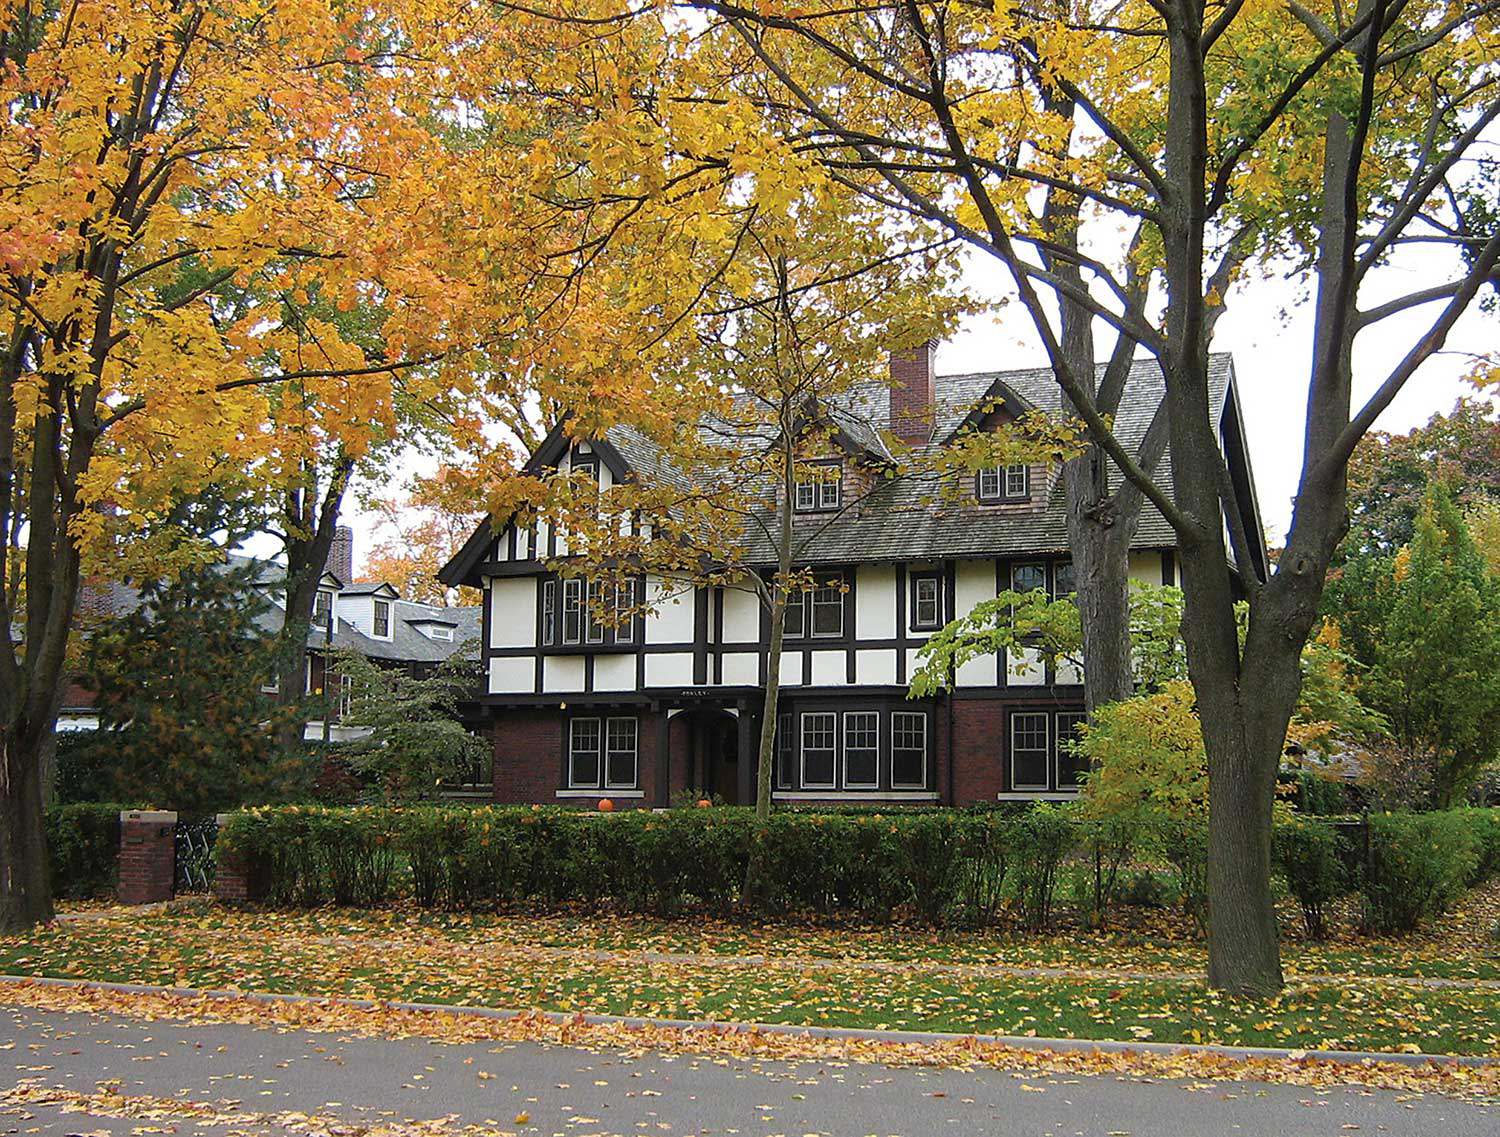 Foxley – The Ambery-Isaacs House, designed by Albert Kahn, on Devonshire Road (Photo courtesy of Pat Malicki)